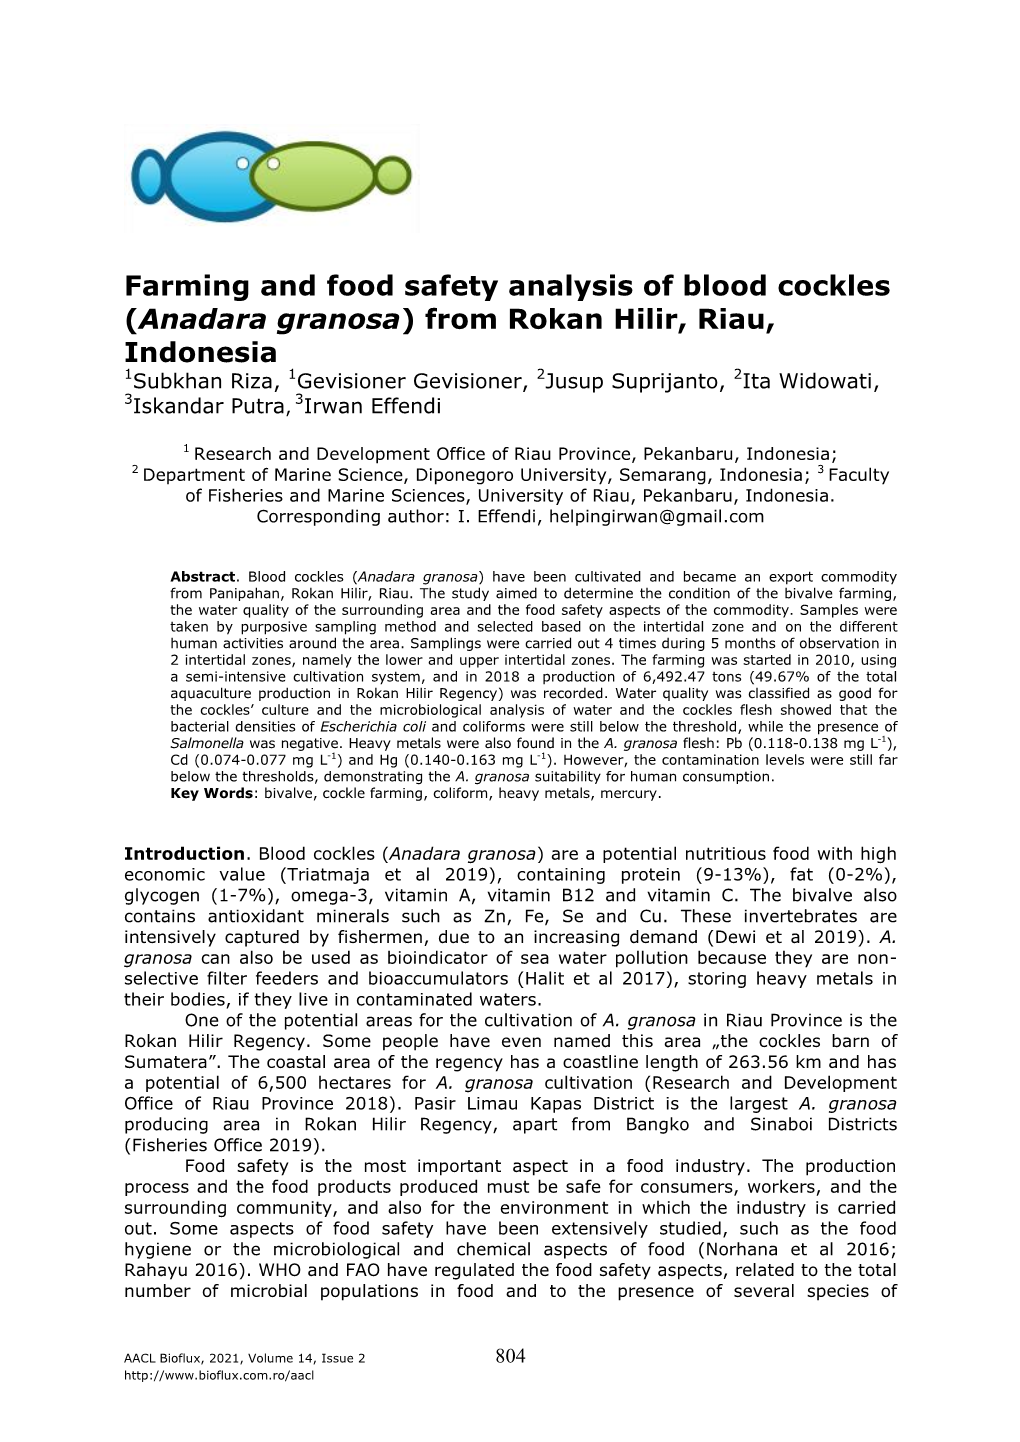 Farming and Food Safety Analysis of Blood Cockles (Anadara Granosa)